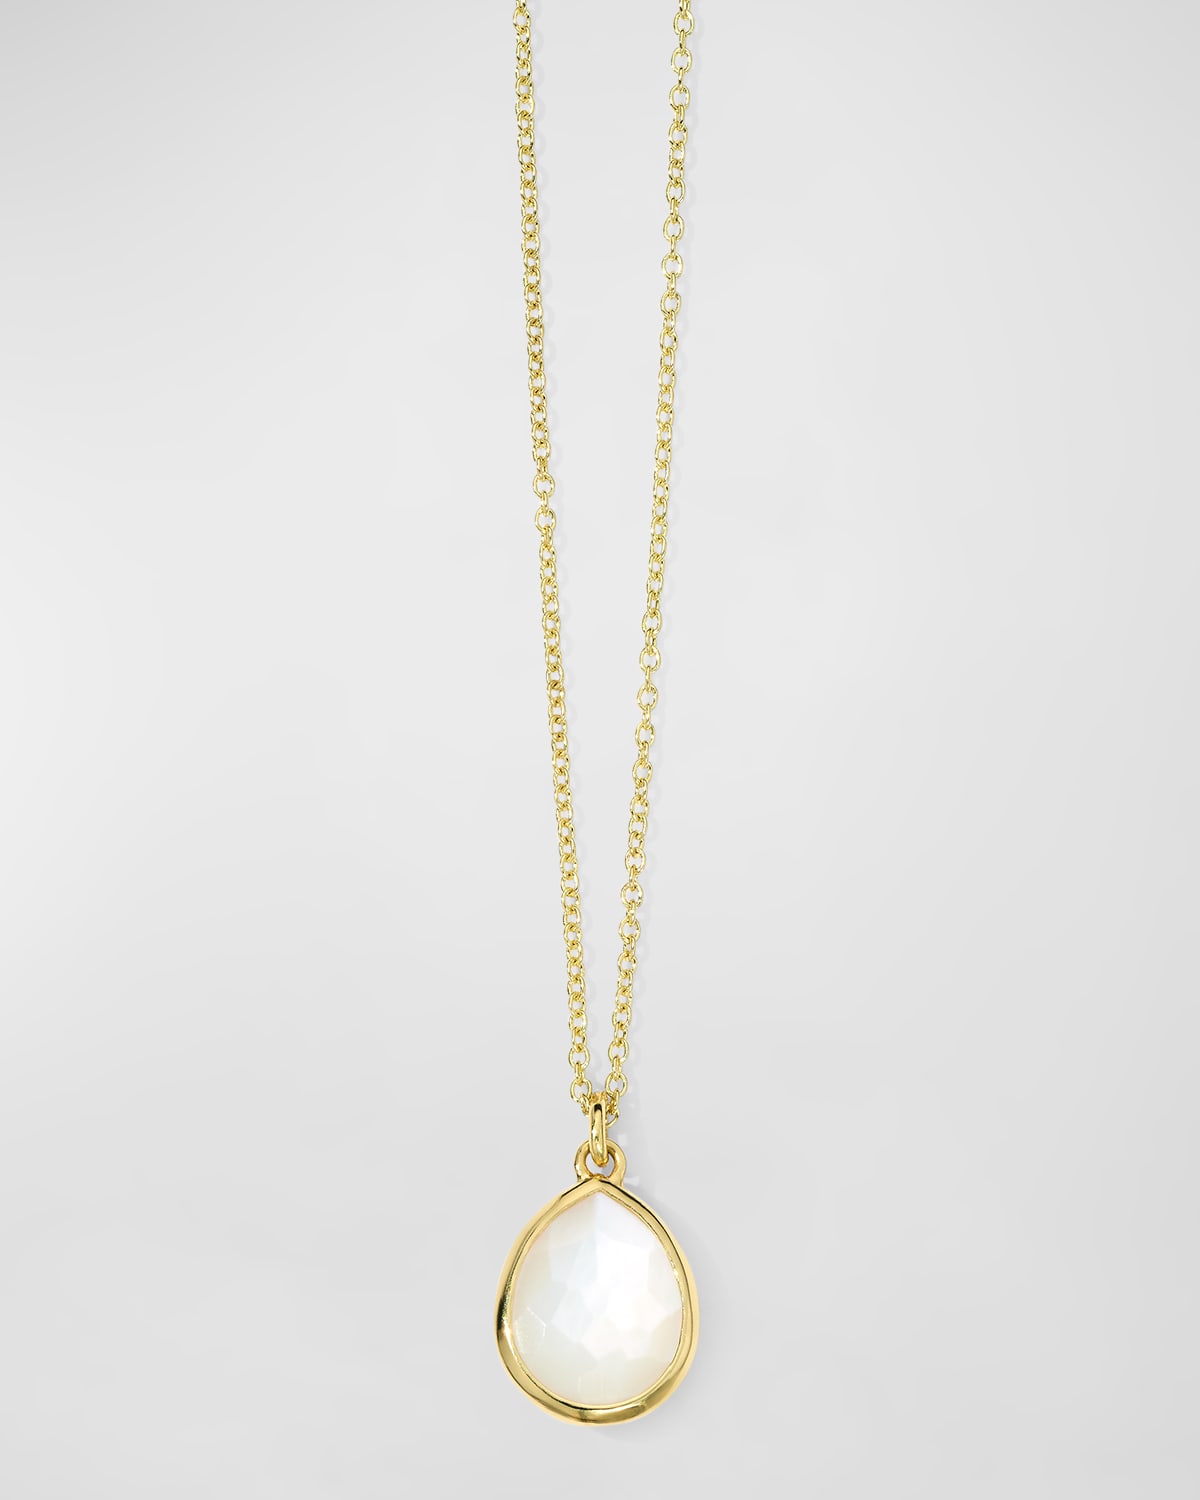 18K Gold Rock Candy Mini Teardrop Pendant Necklace in Mother-of-Pearl Doublet, 16-18"L